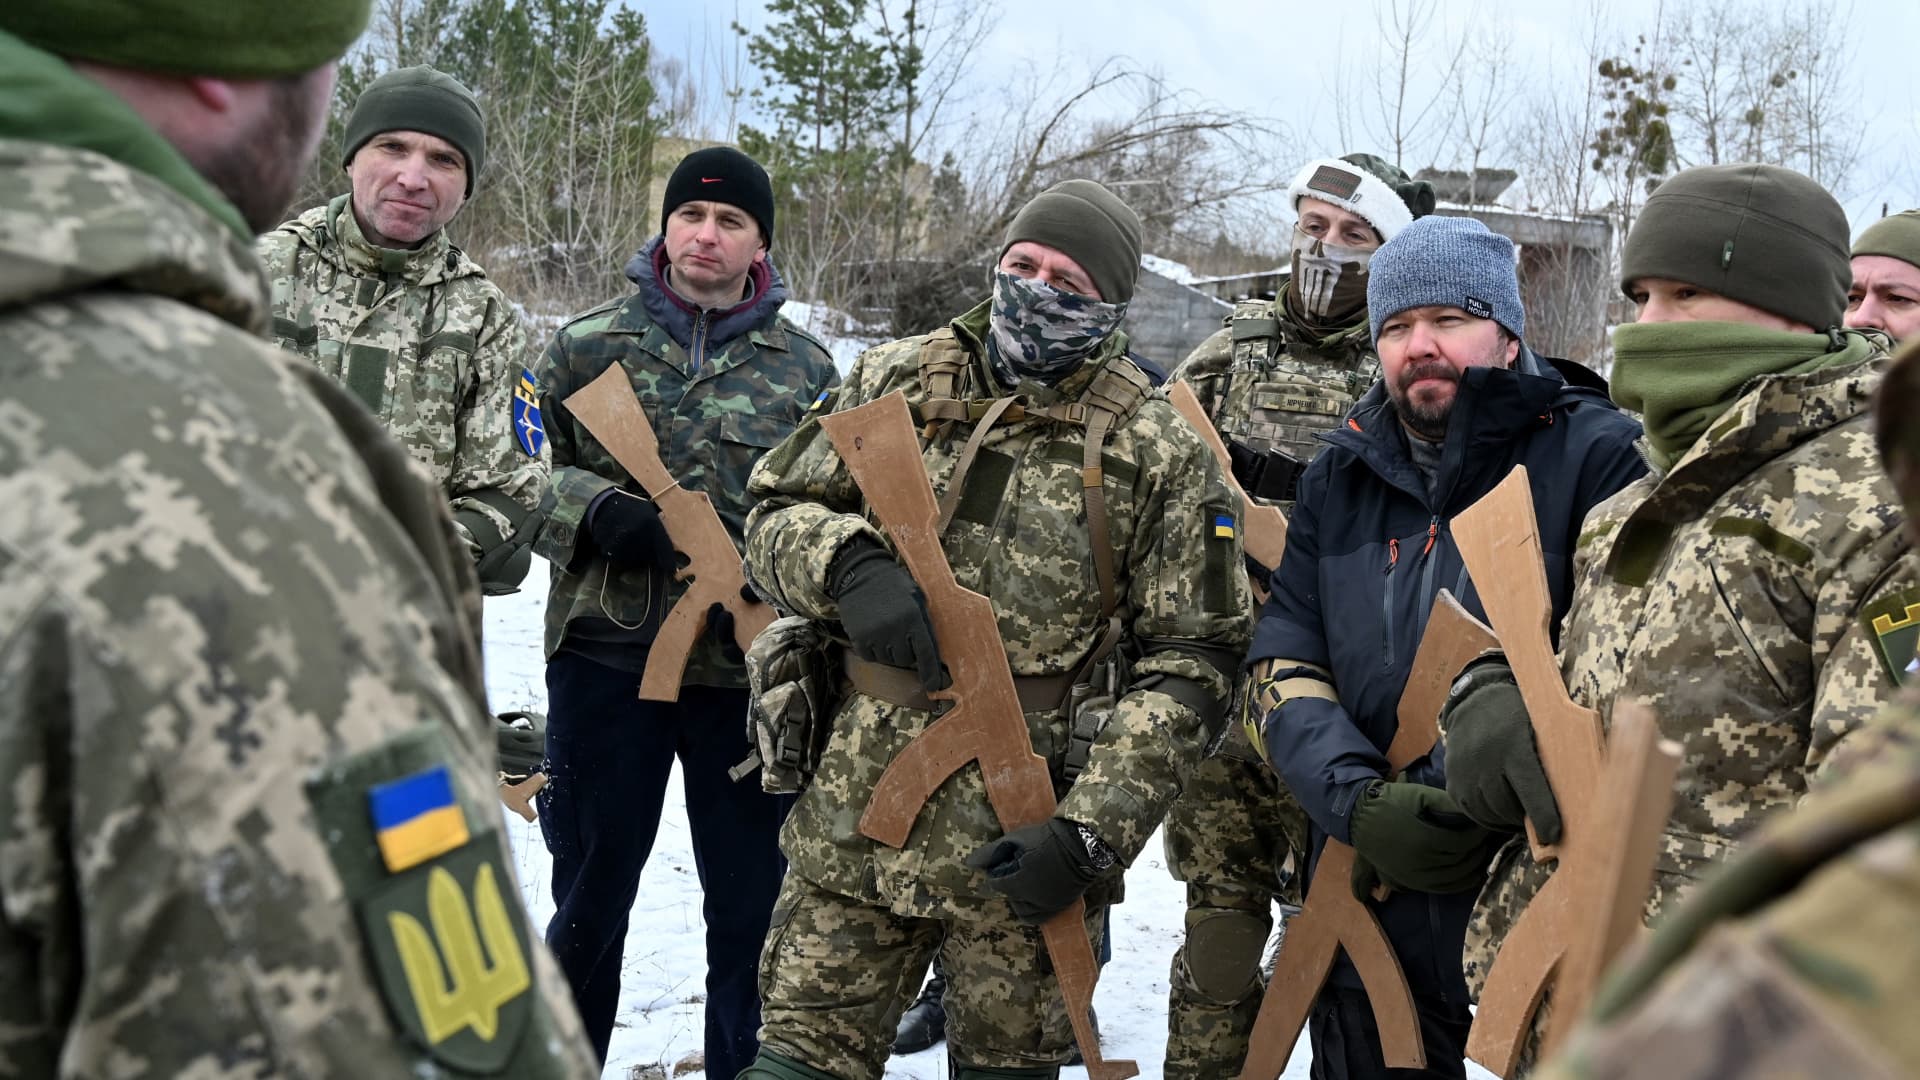 Ukrainian Territorial Defense Forces, the military reserve of the Ukrainian Armes Forces, holding wooden replicas of Kalashnikov rifles, take part in a military exercise near Kiev on December 25, 2021.